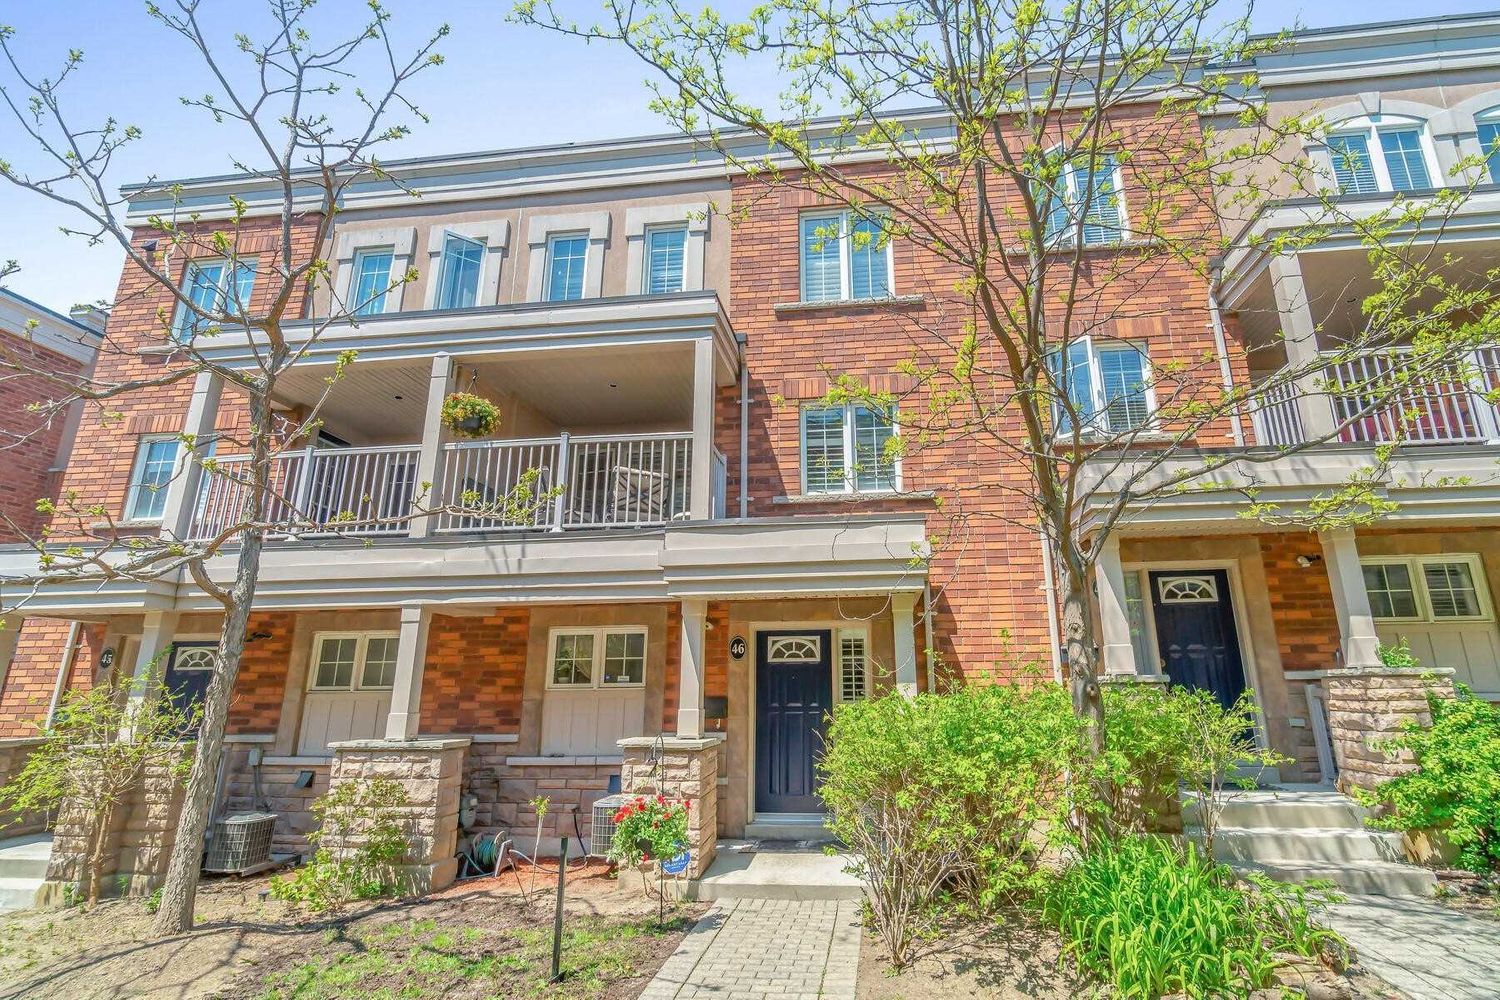 365 Murray Ross Parkway. 365 Murray Ross Parkway Townhomes is located in  North York, Toronto - image #1 of 3